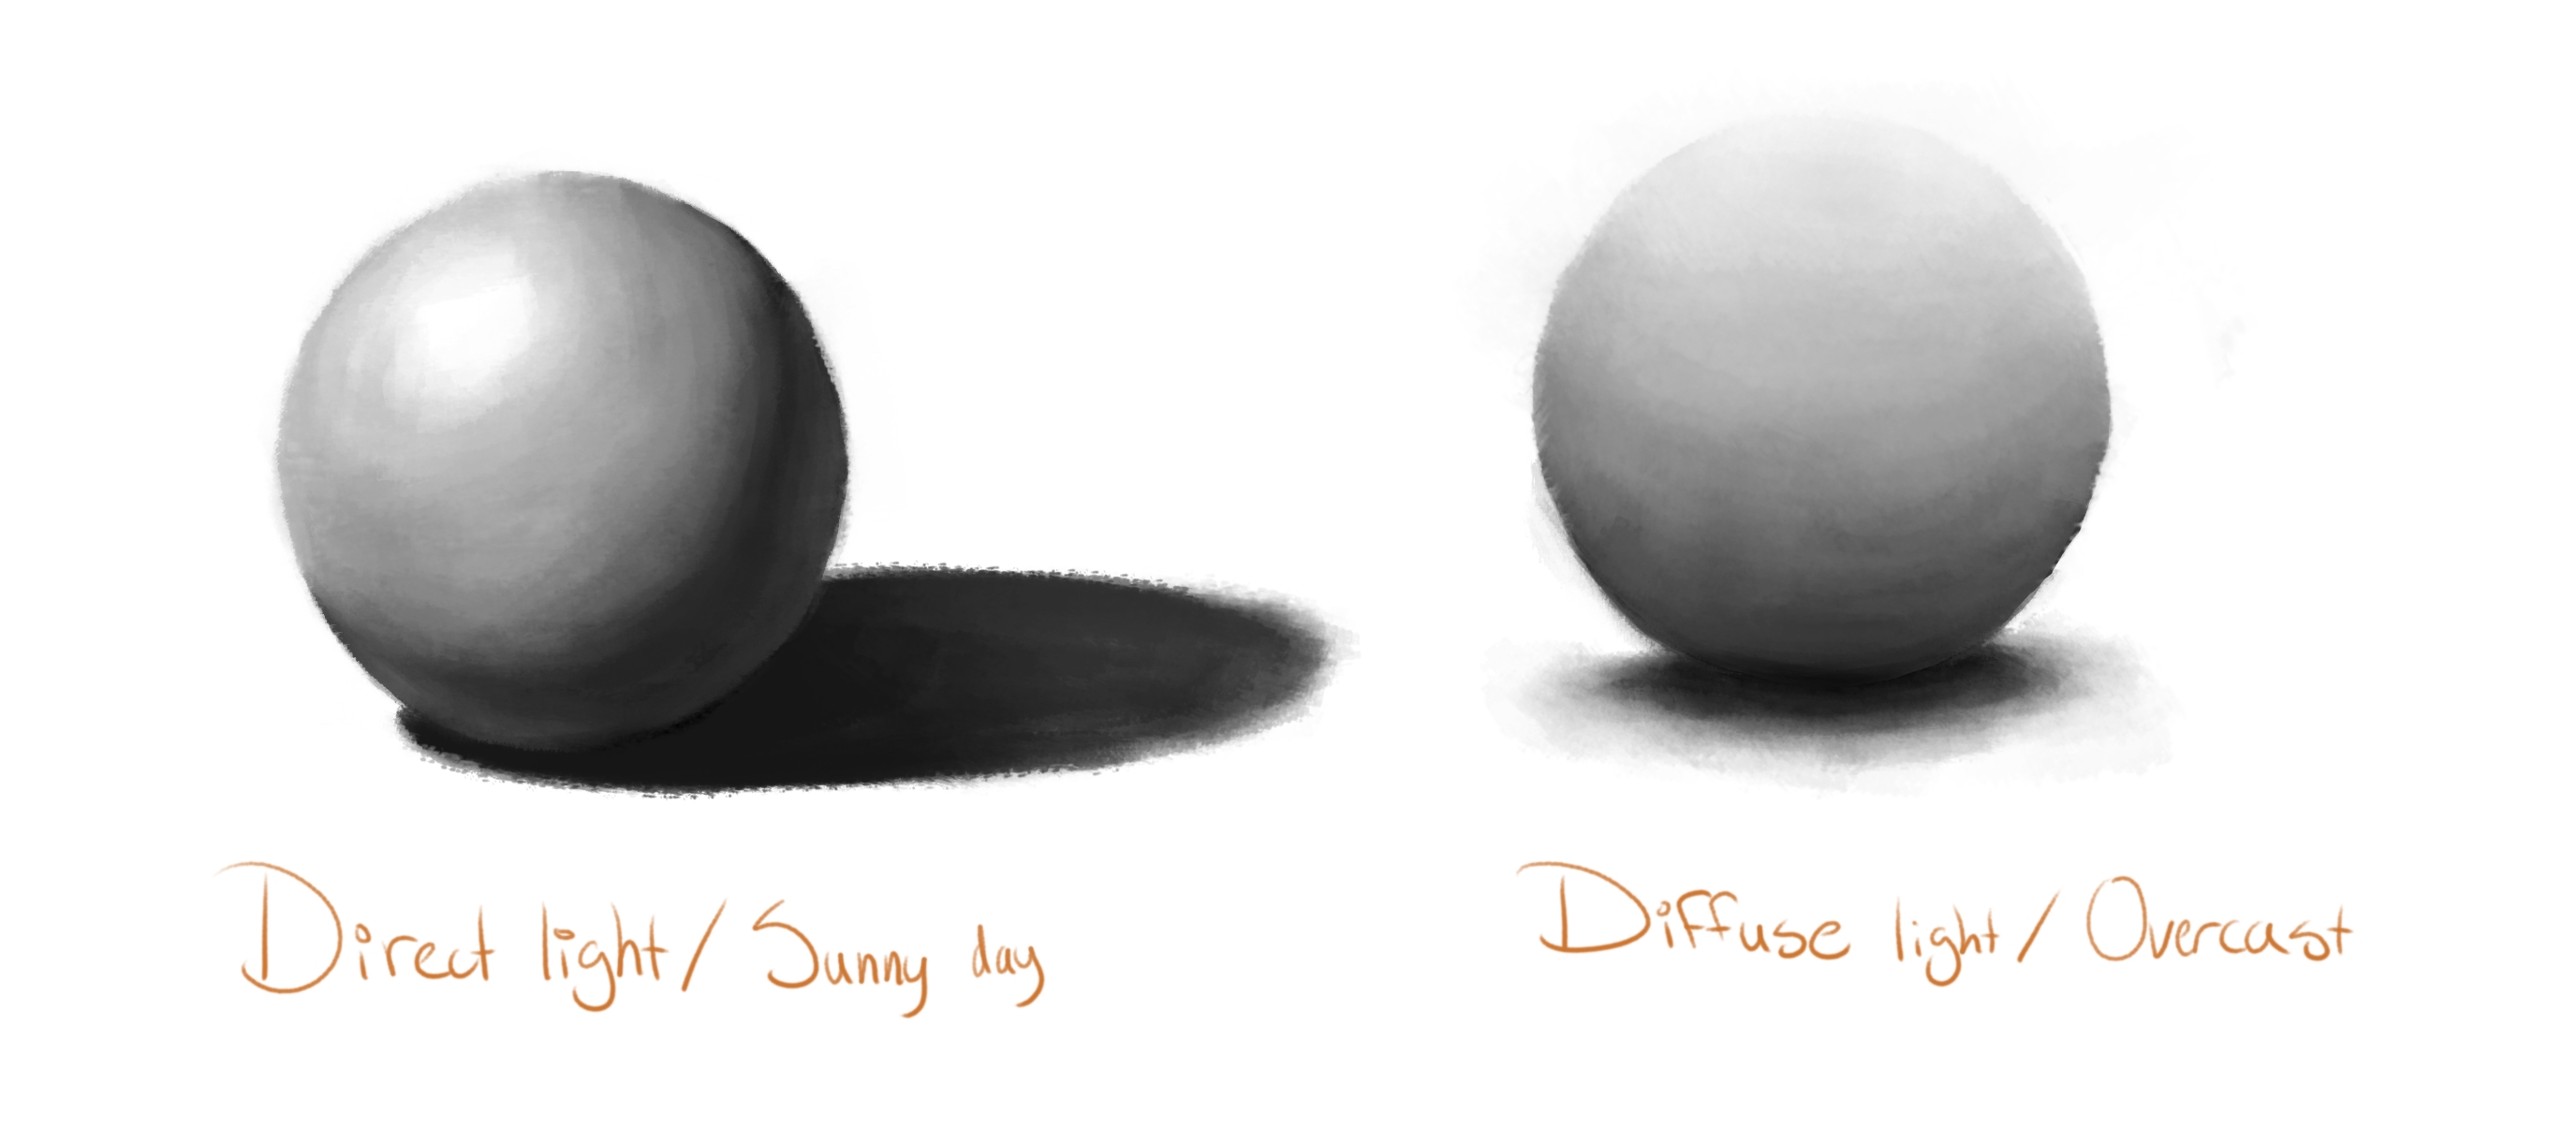 image of two shaded spheres in greyscale, one in direct light, one in diffuse light